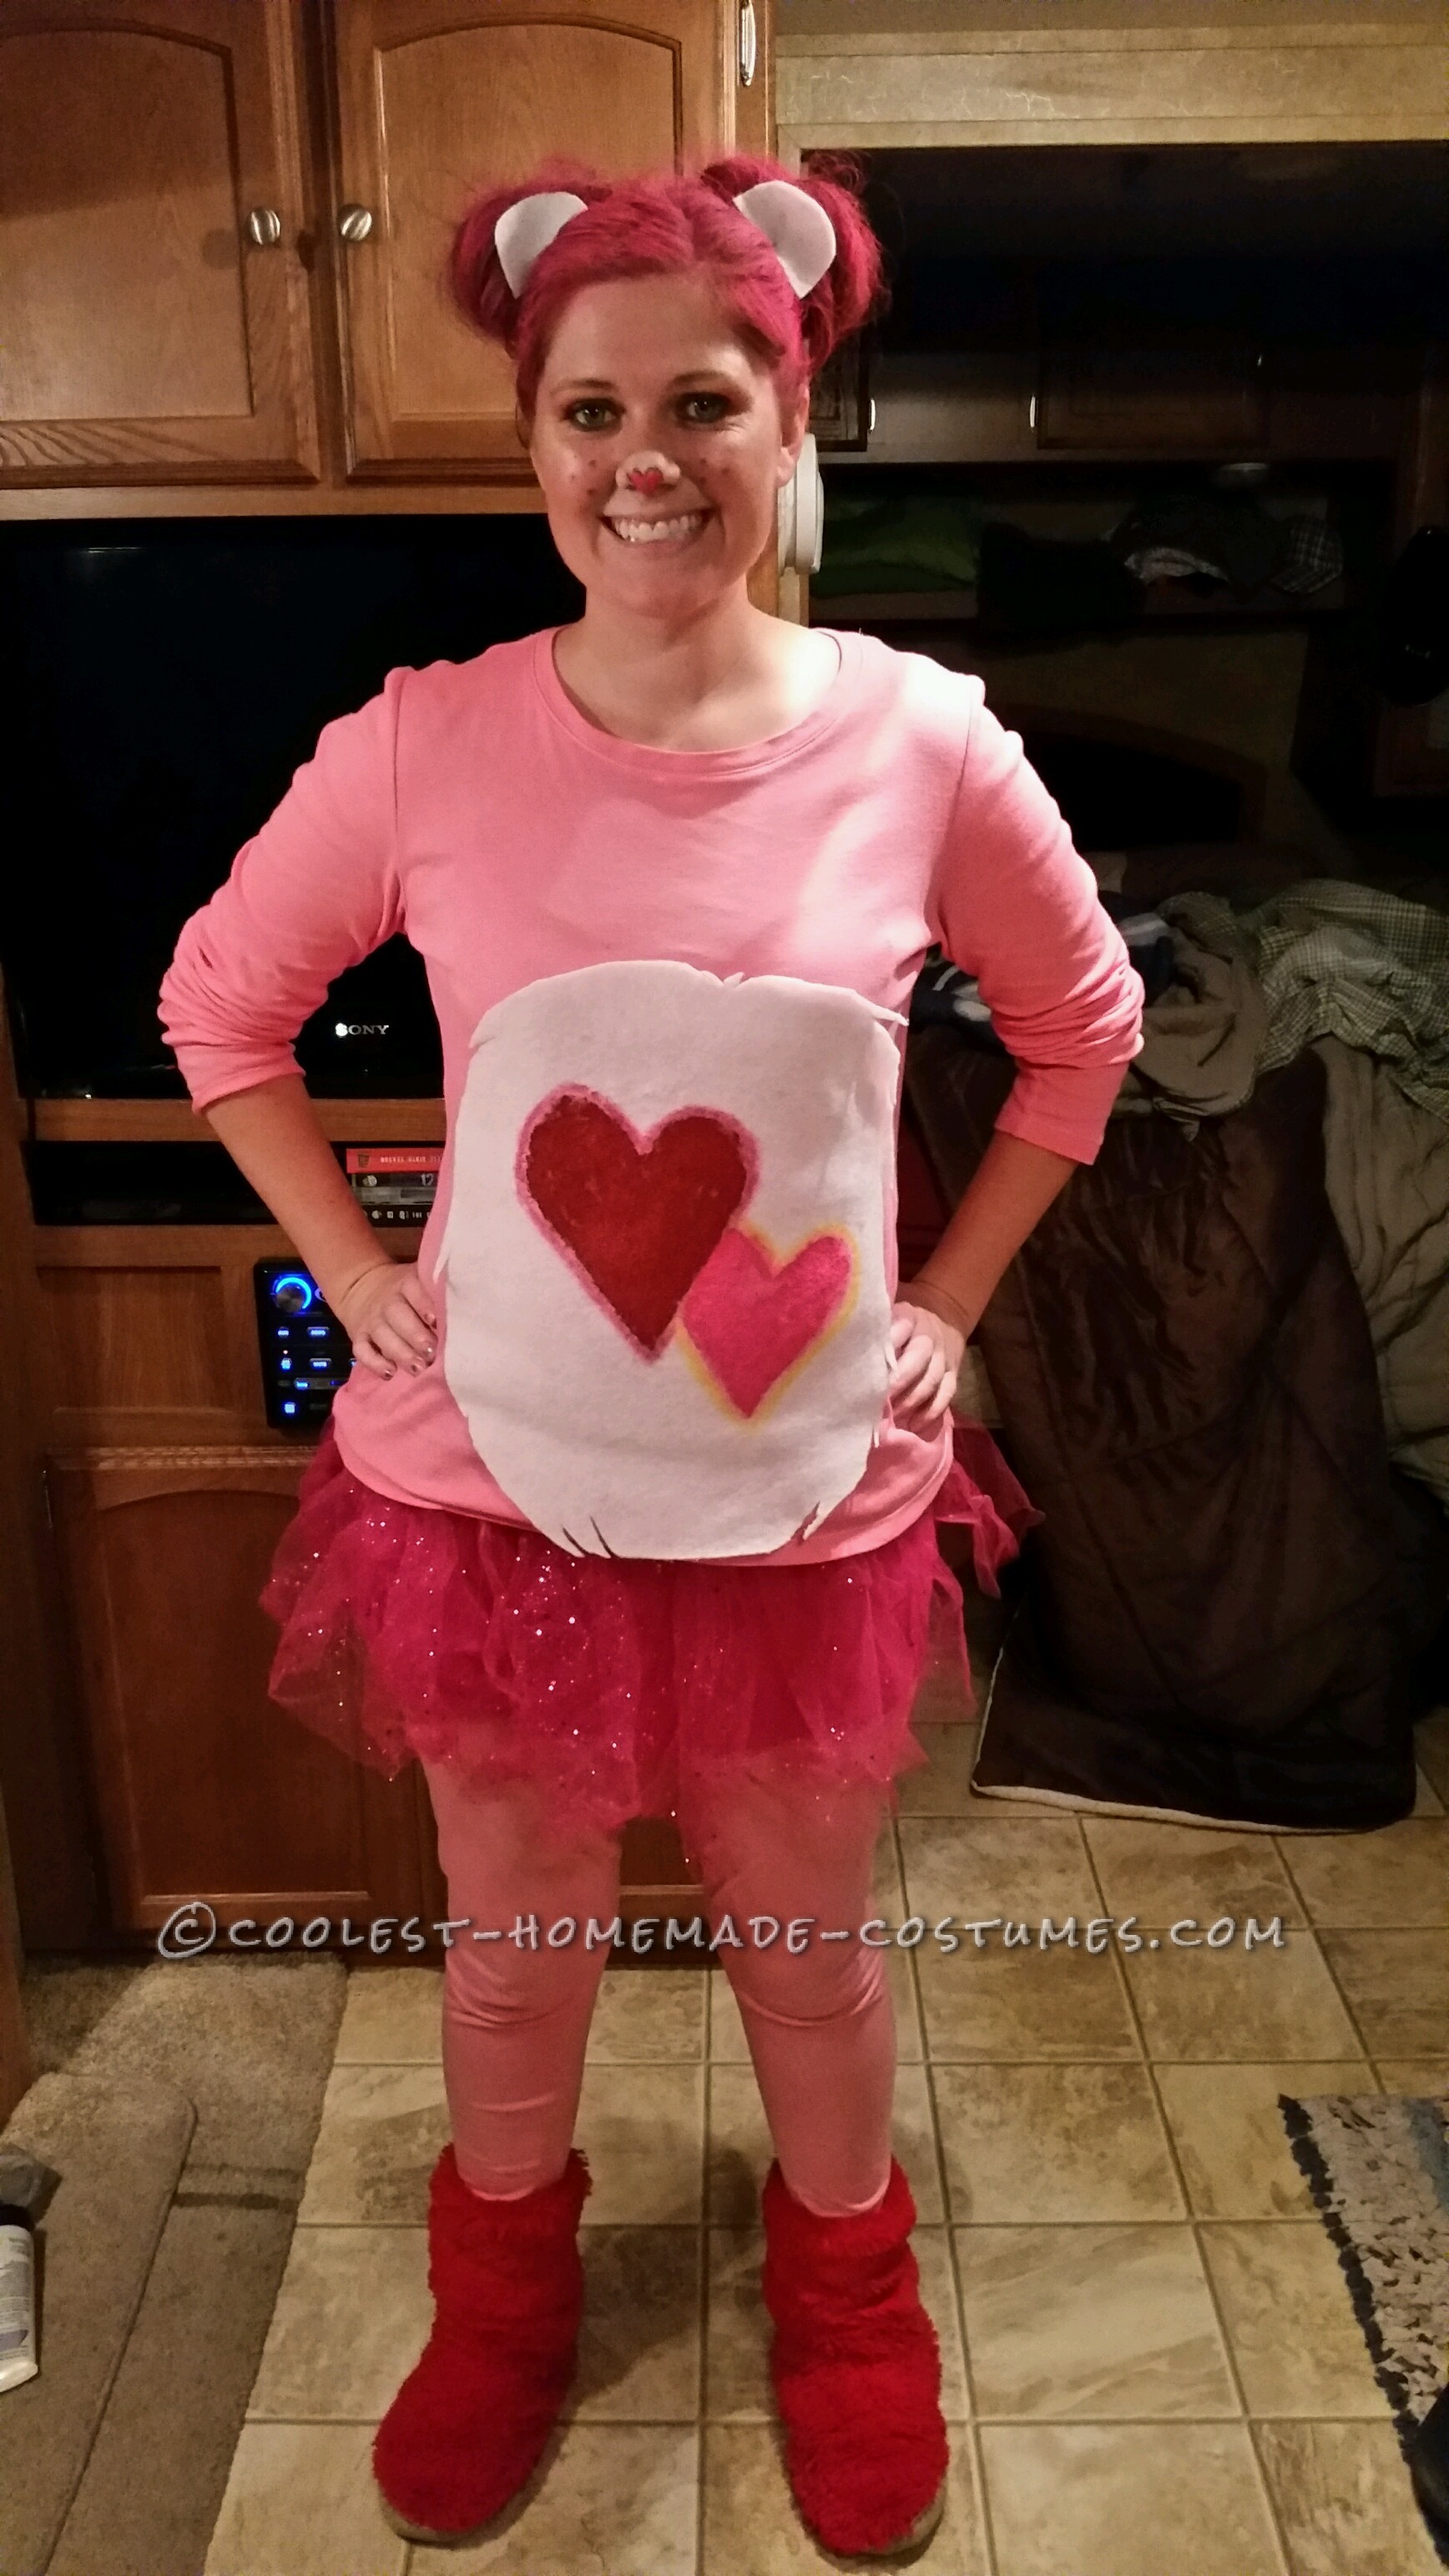 Woman's Low Cost Last Minute Love-a-Lot Care Bear Costume